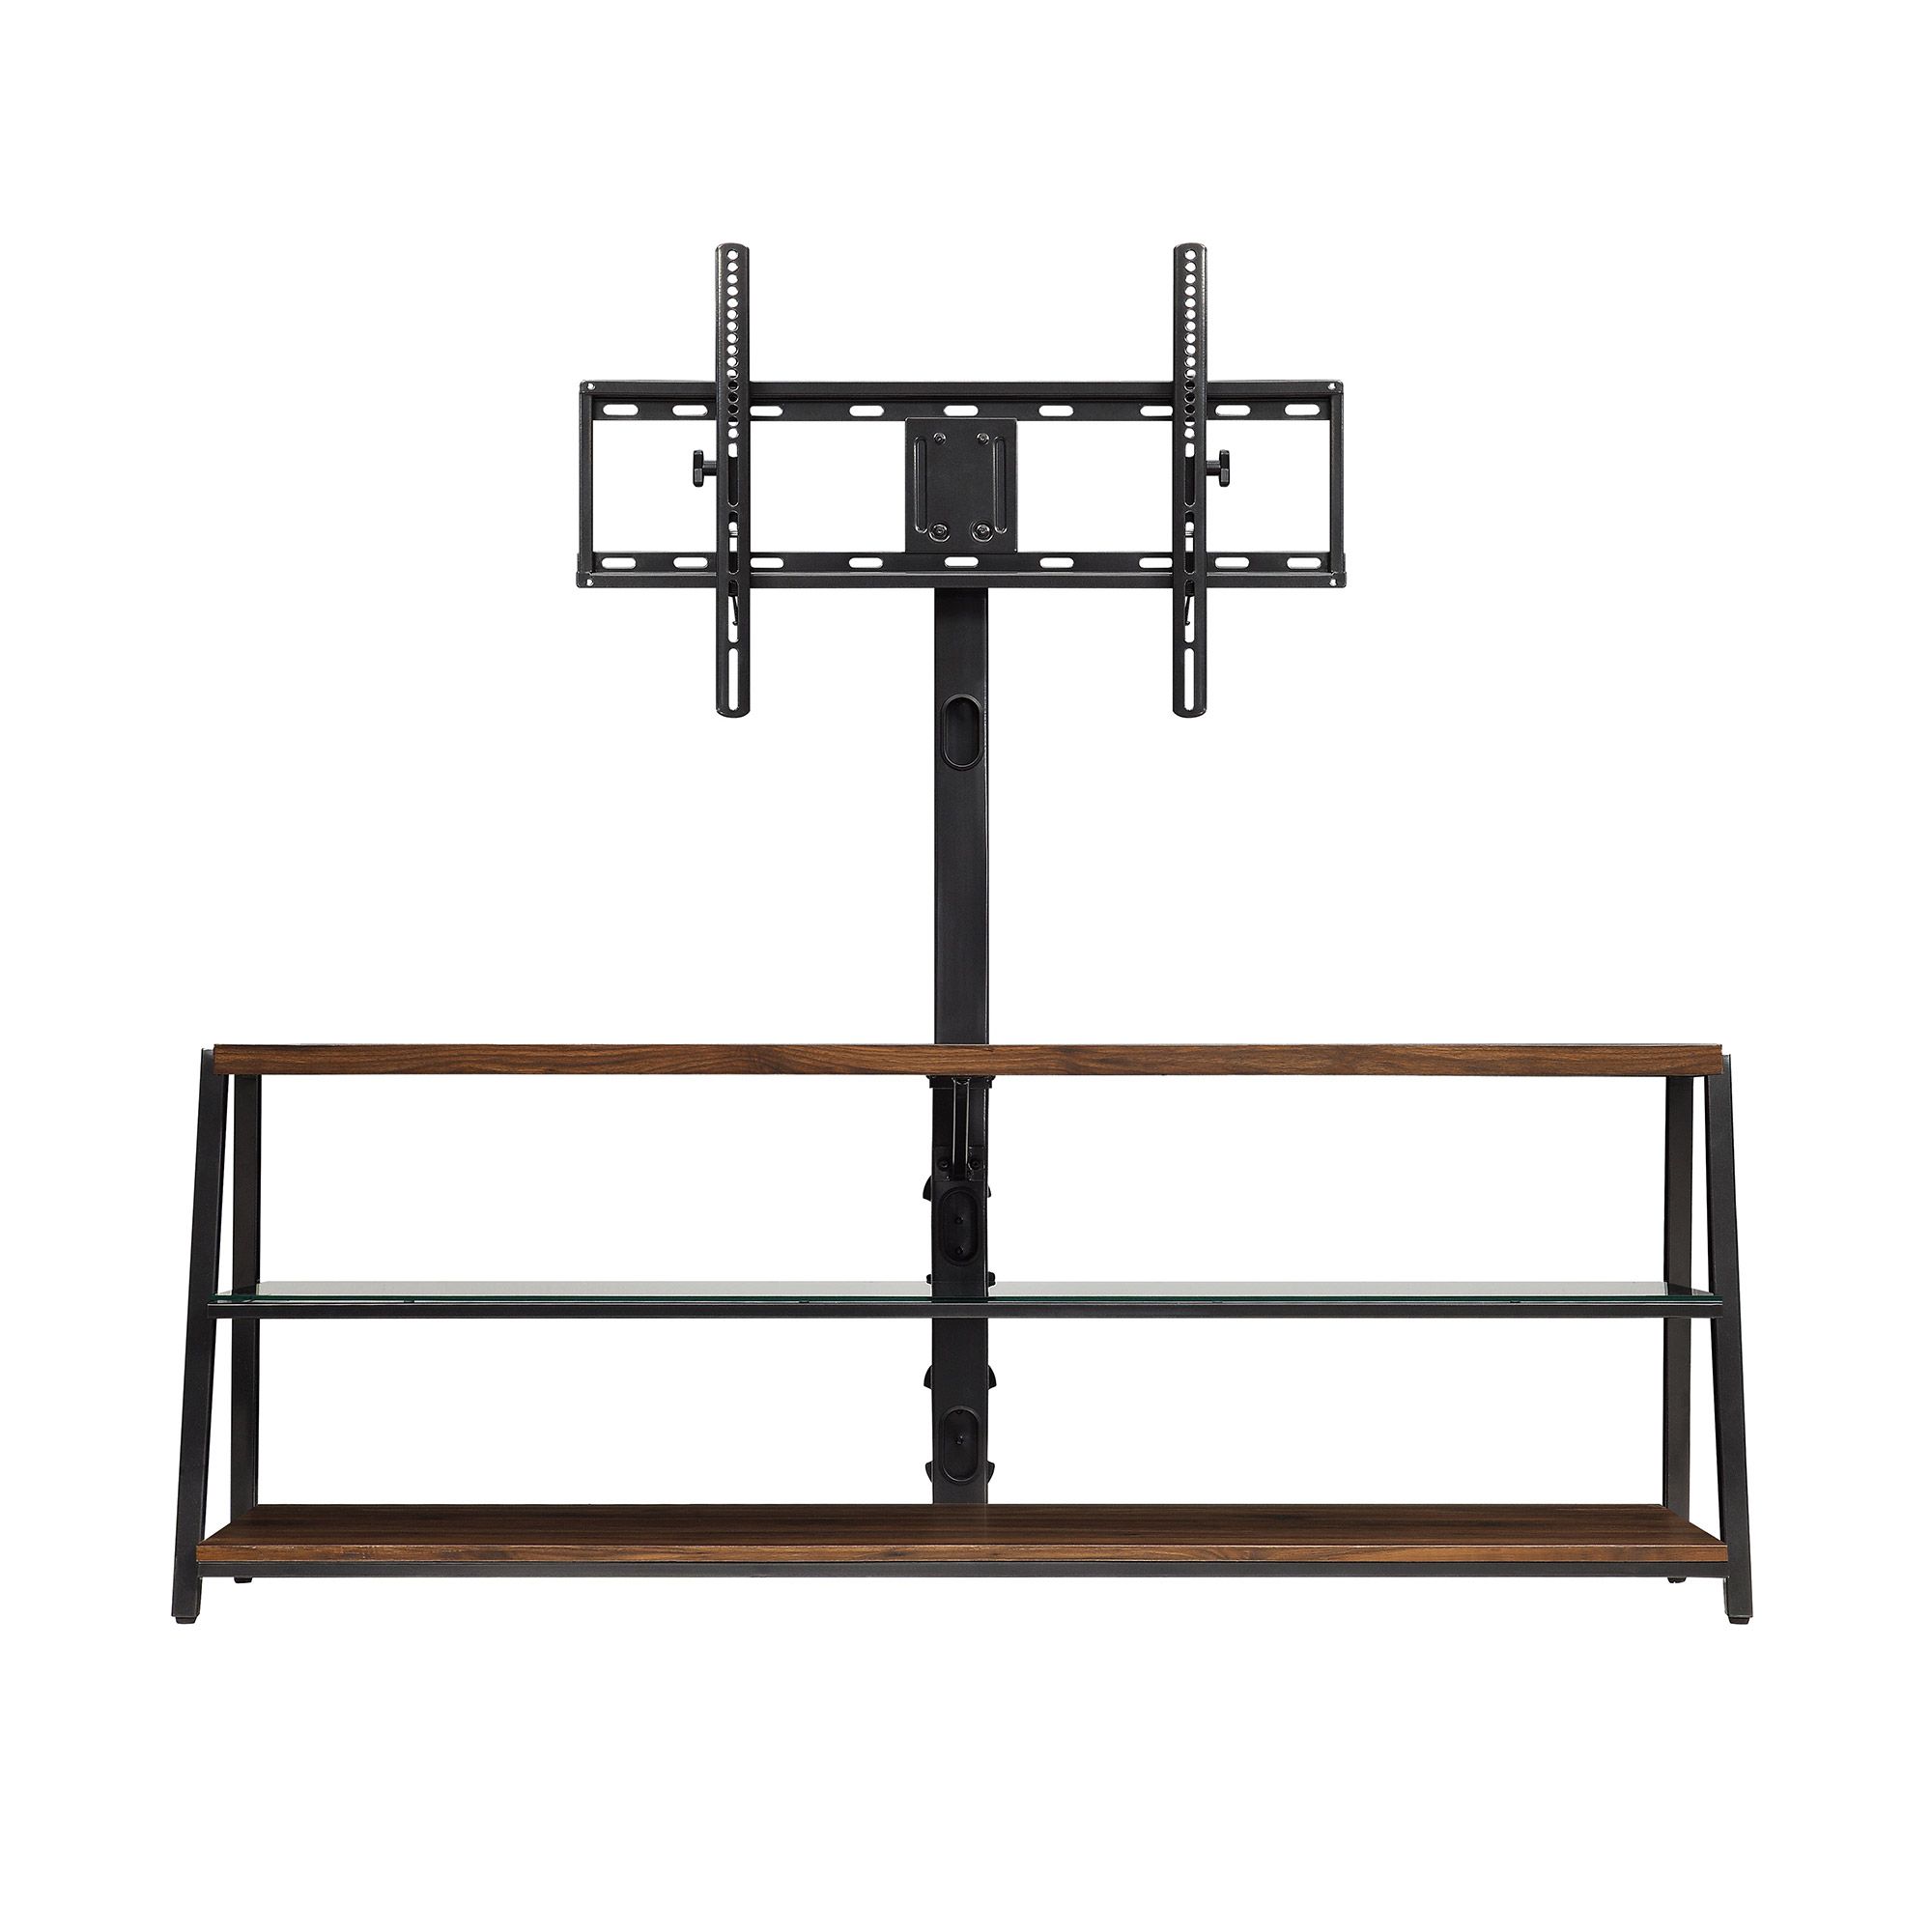 Famous Mainstays Arris 3 In 1 Tv Stand For Televisions Up To 70 Pertaining To Mainstays Arris 3 In 1 Tv Stands In Canyon Walnut Finish (Photo 6 of 10)